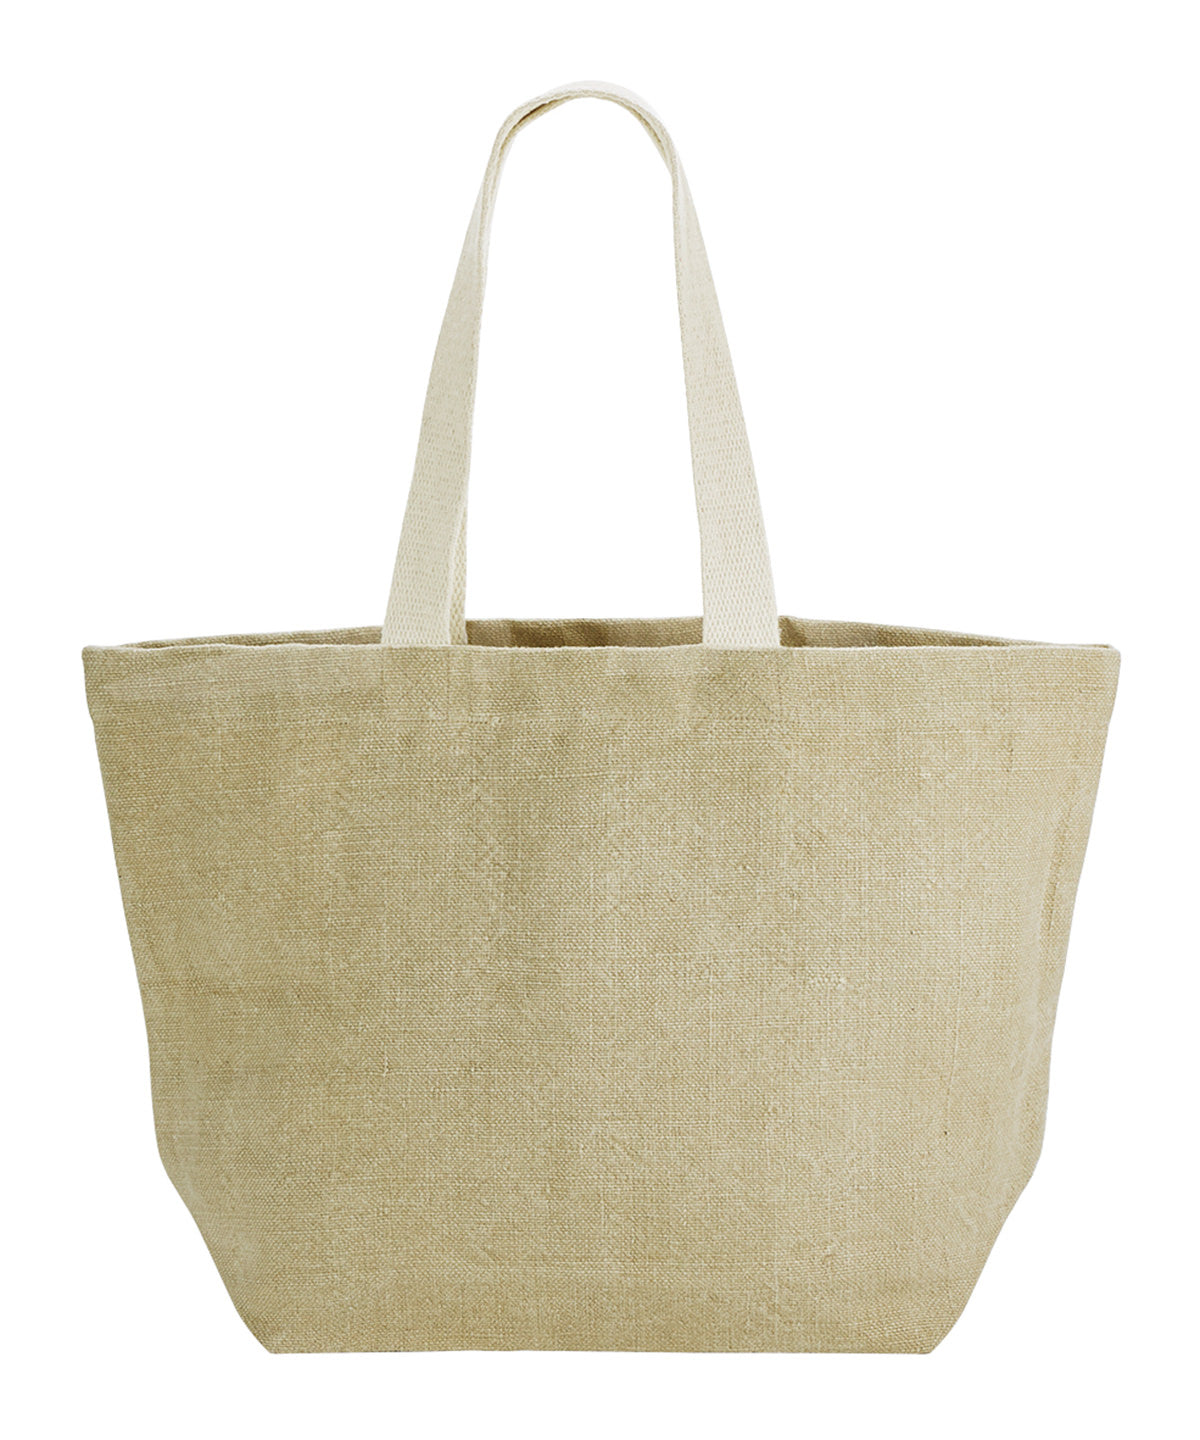 SUMMER VIBES Tote Bag